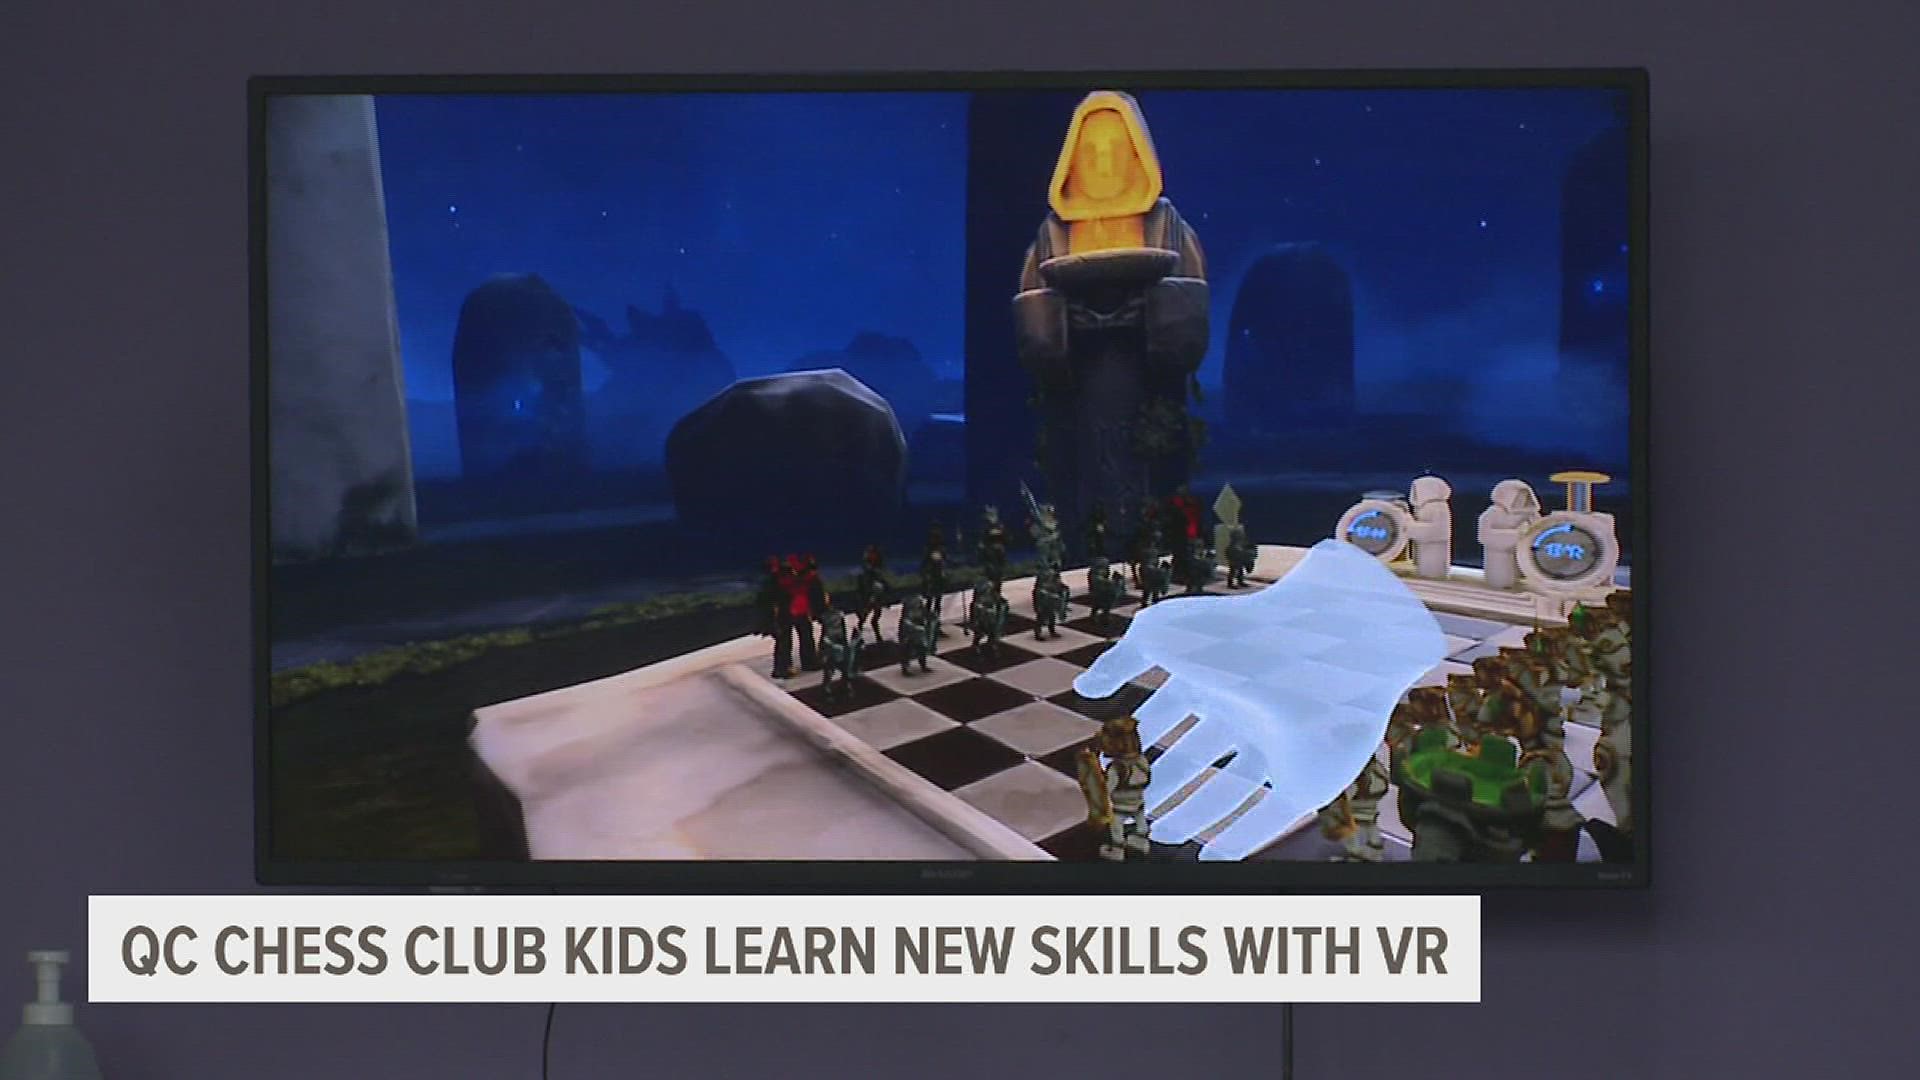 The students design and create their own chess board and pieces and then use VR technology to play against each other.